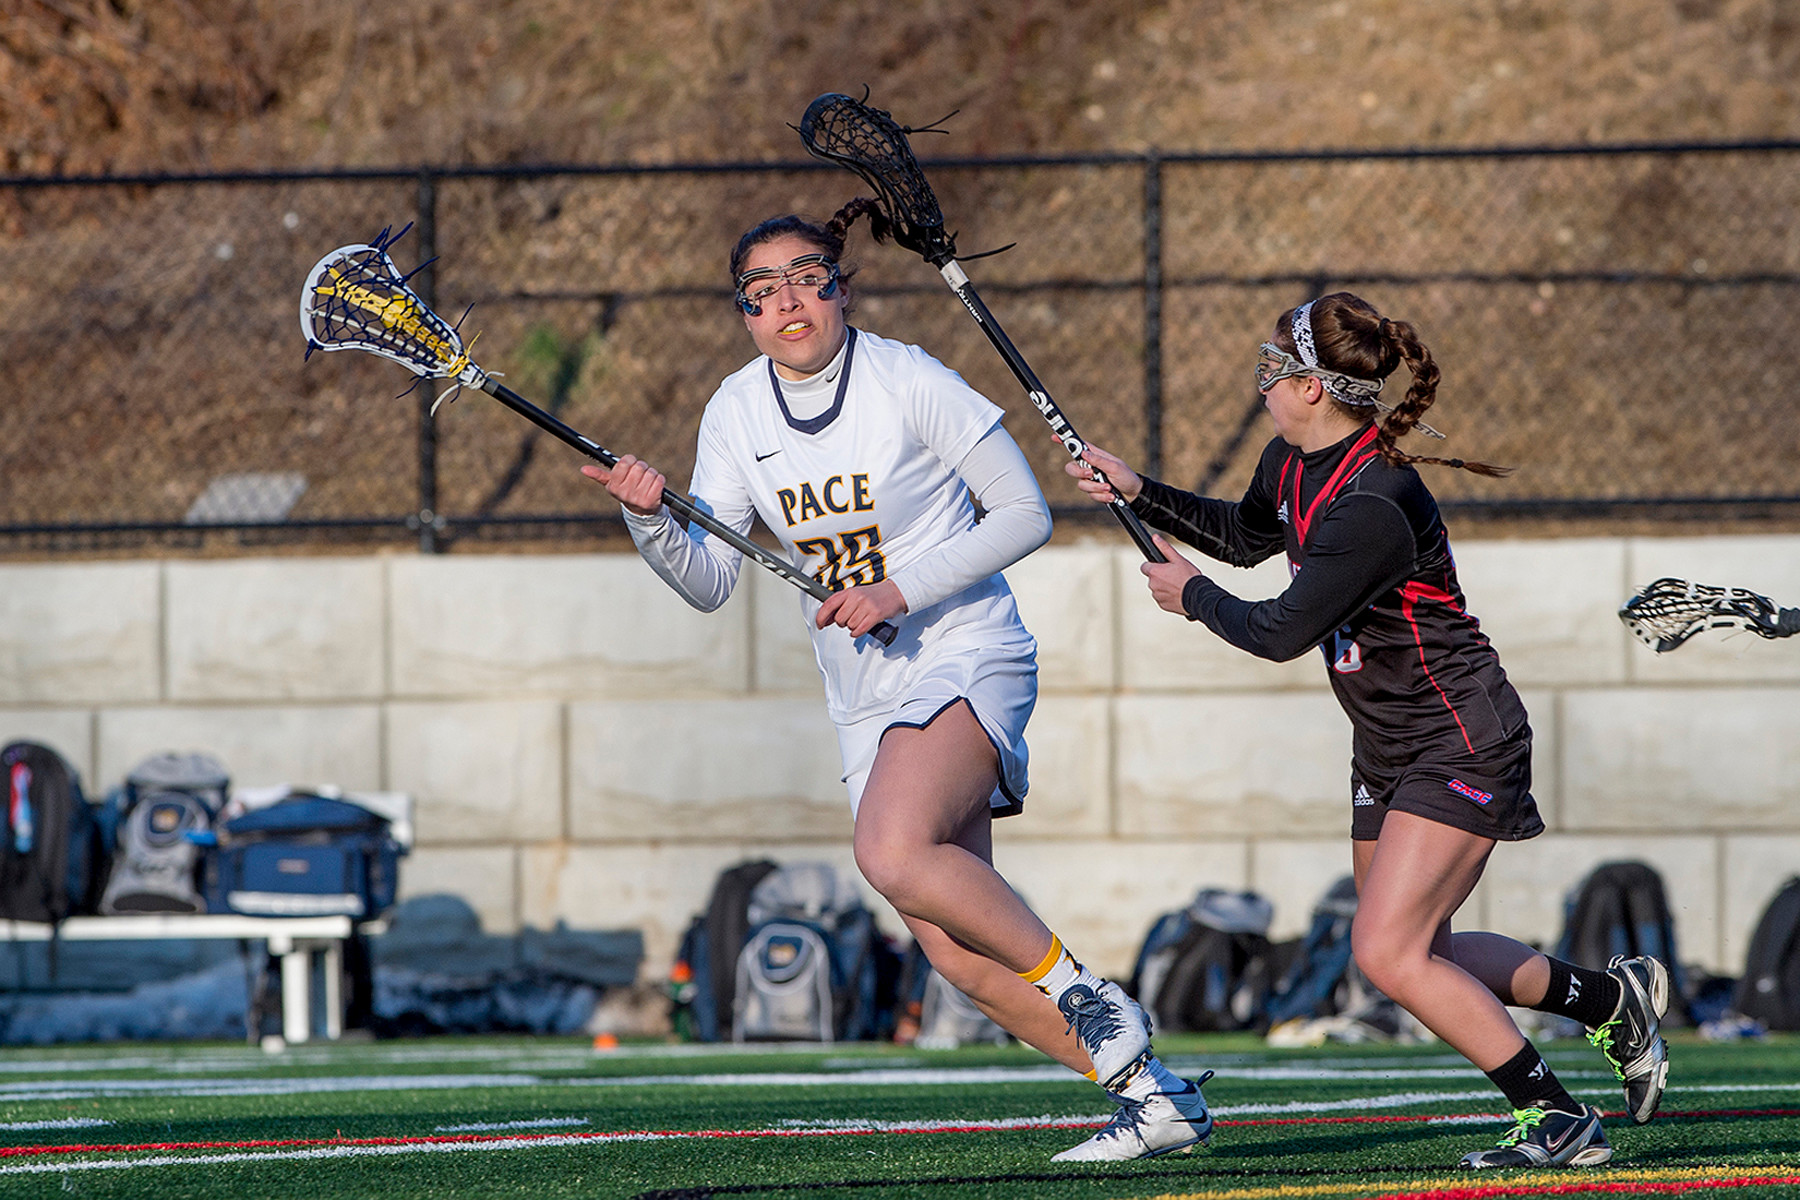 Shannon Duncan, who graduated last year from Seaford High School, has continued her lacrosse career for the Pace University setters.